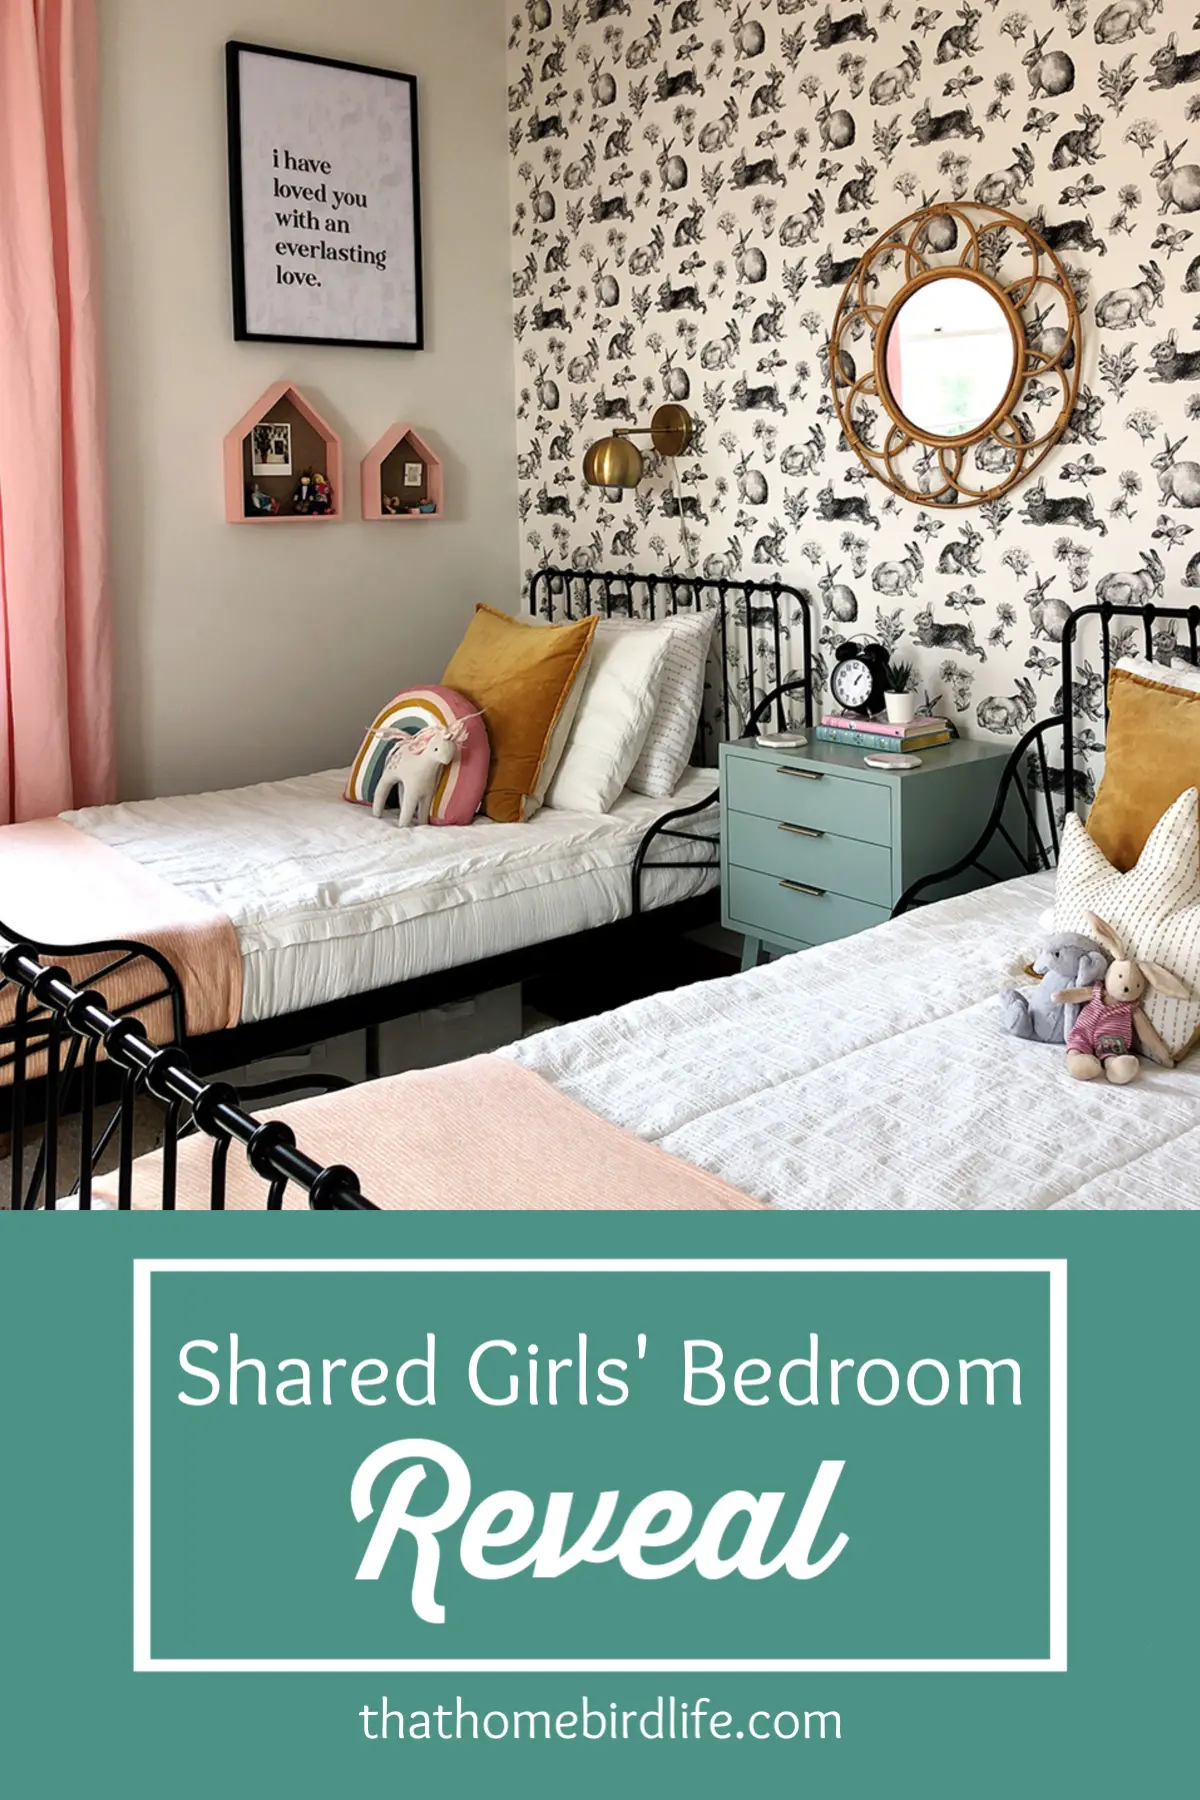 Girls' Bedroom Reveal - Guest Participant of the One Room Challenge - That Homebird Life Blog #kidsroom #kidsdecor #wallpaper